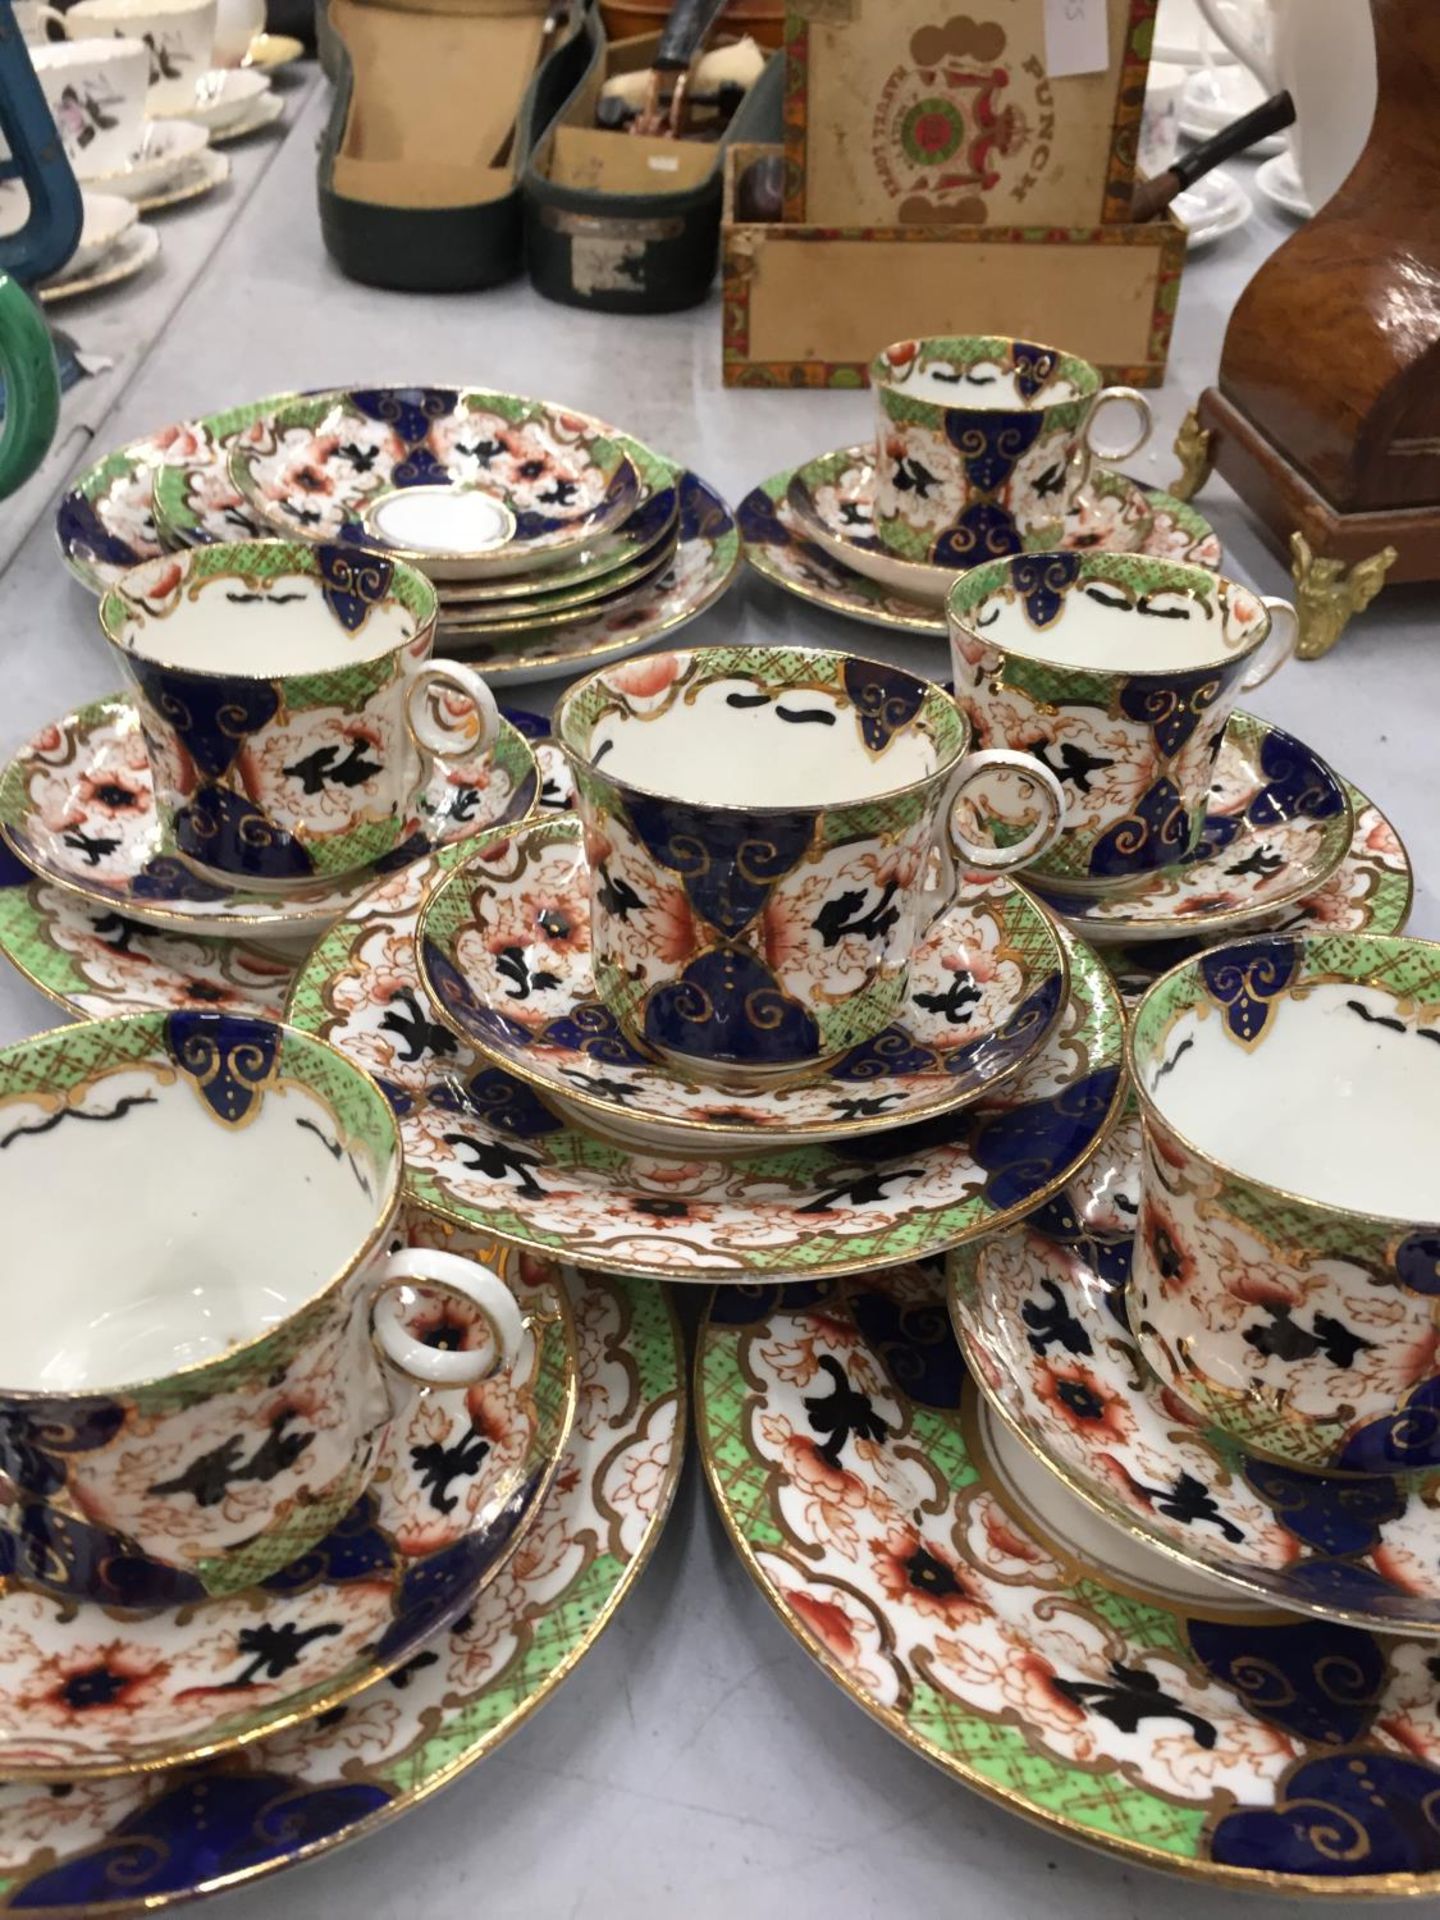 A COLLECTION OF VINTAGE ROYAL STAFFORD CUPS, SAUCERS AND SIDE PLATES - Image 4 of 4